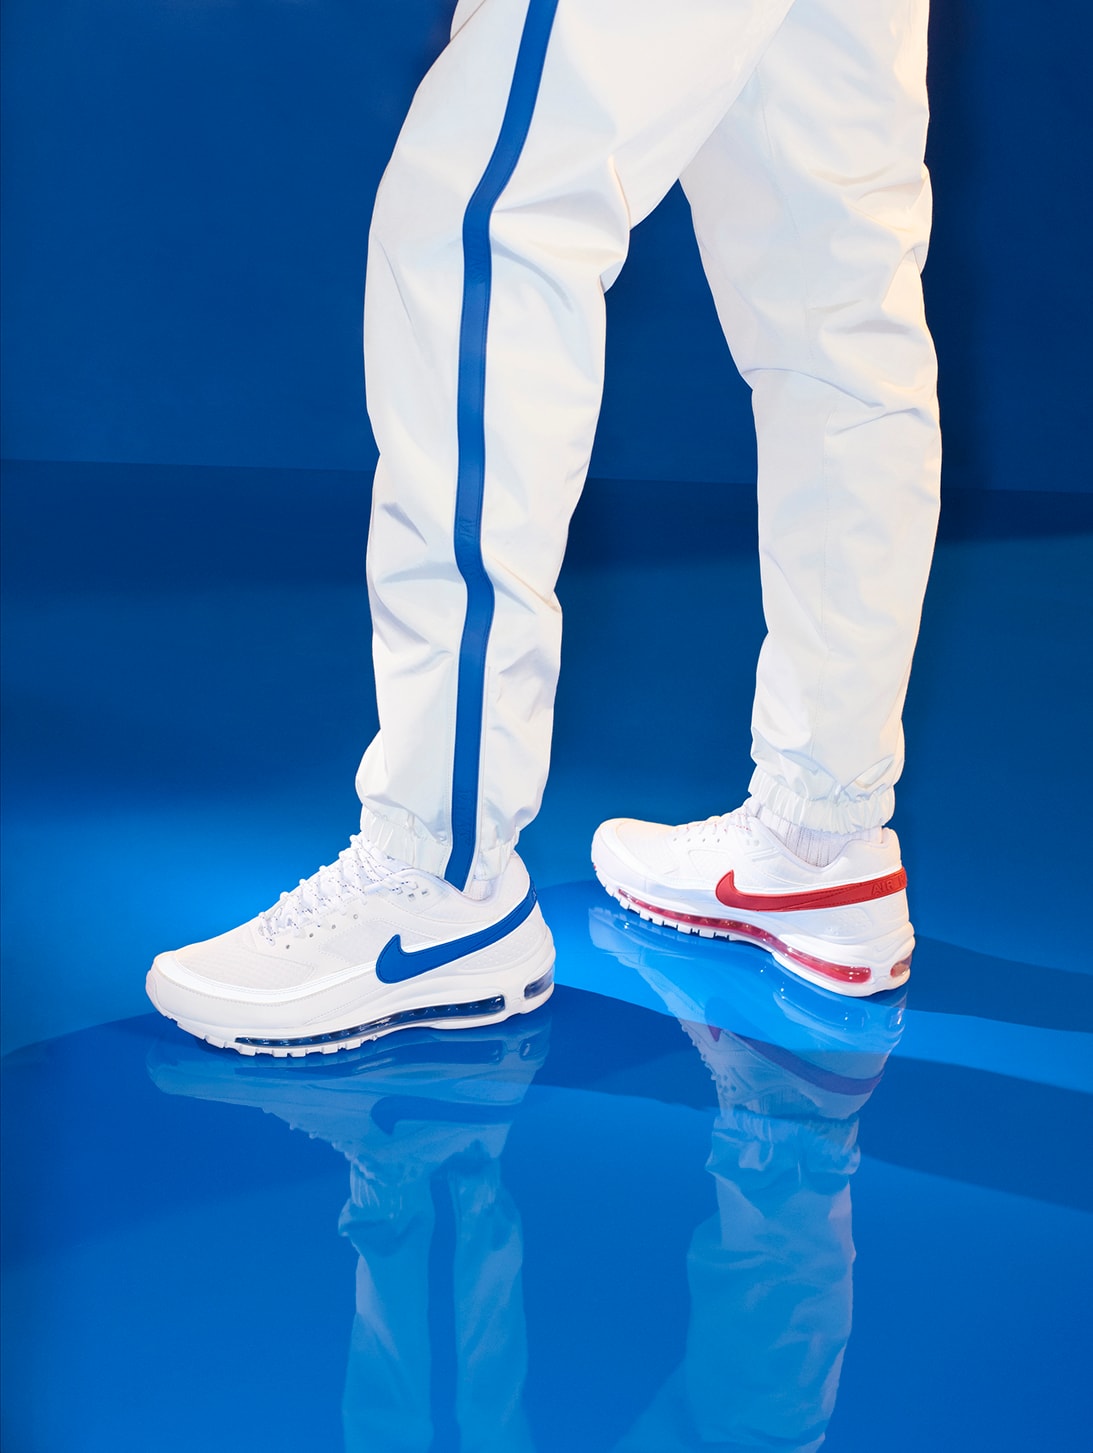 Skepta Nike Air Max 97 BW SK Inspiration Paris London Colors Tinker Hatfield Dizzee Rascal Silhouette Reason Idea How to Buy Release Details Information How to Cop